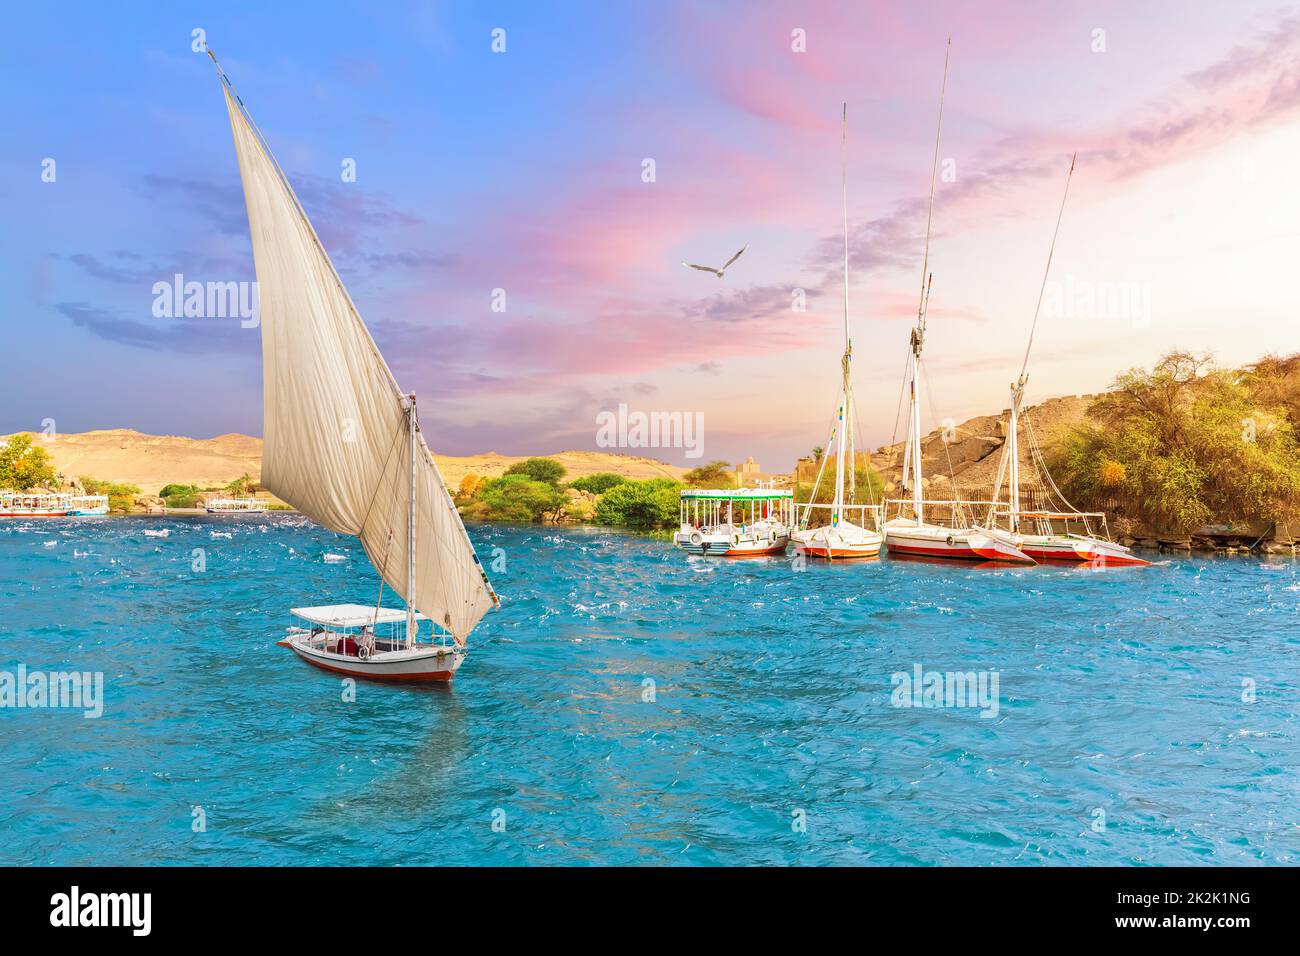 Aswan city in Egypt, beautiful scenery of the Nile river with Sailboats Stock Photo